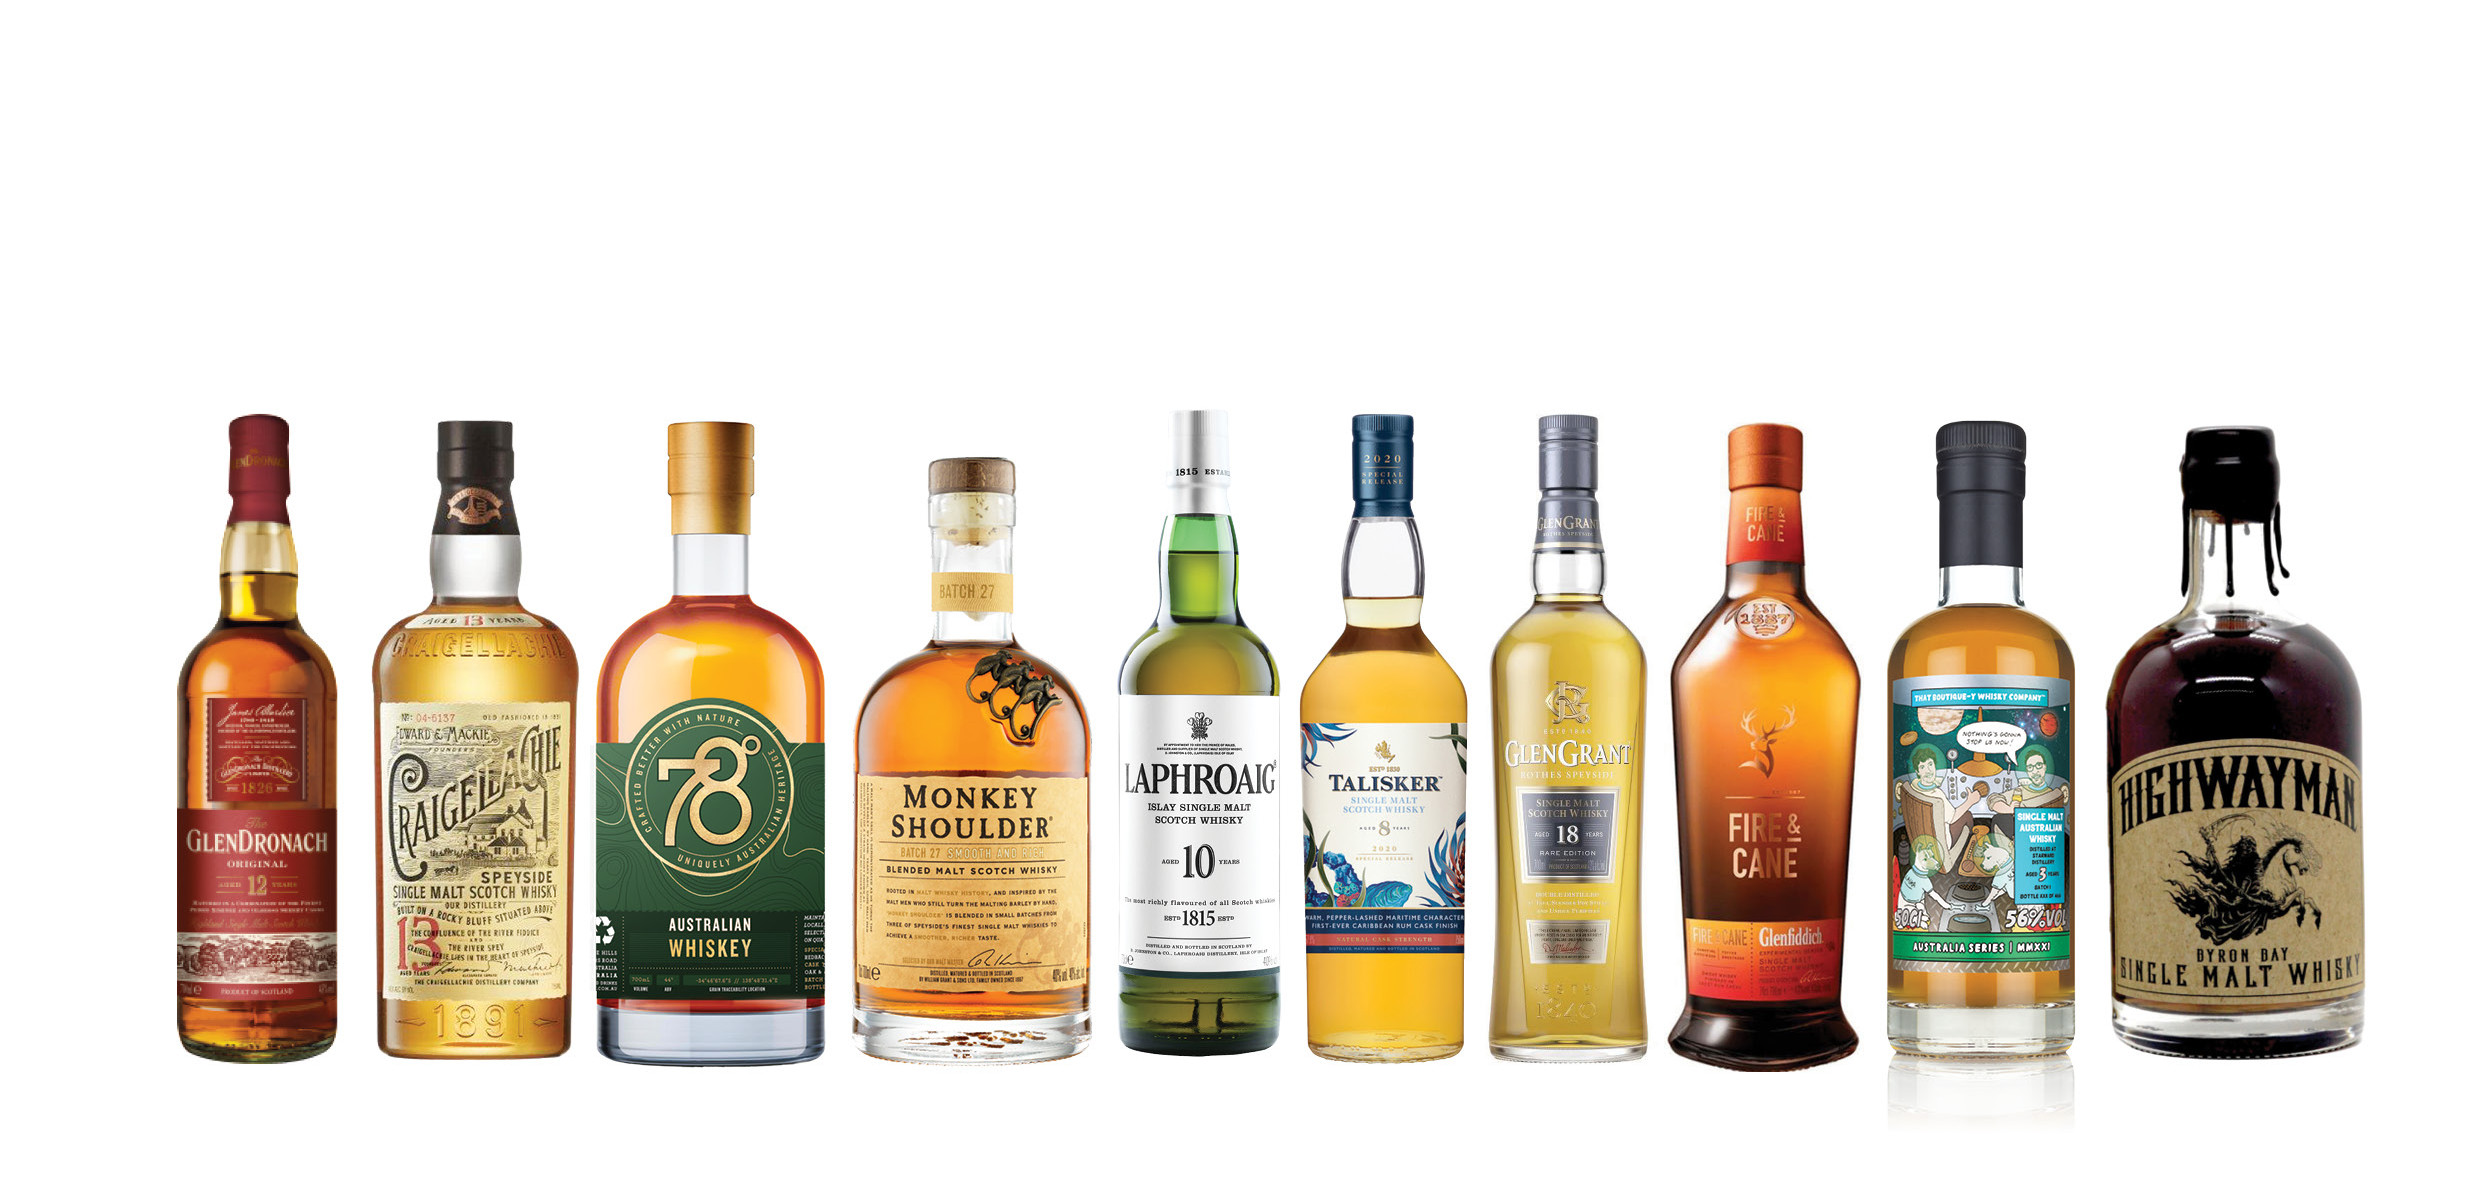 It's World Whisky Day tomorrow! Here are 10 drams to try along with ...